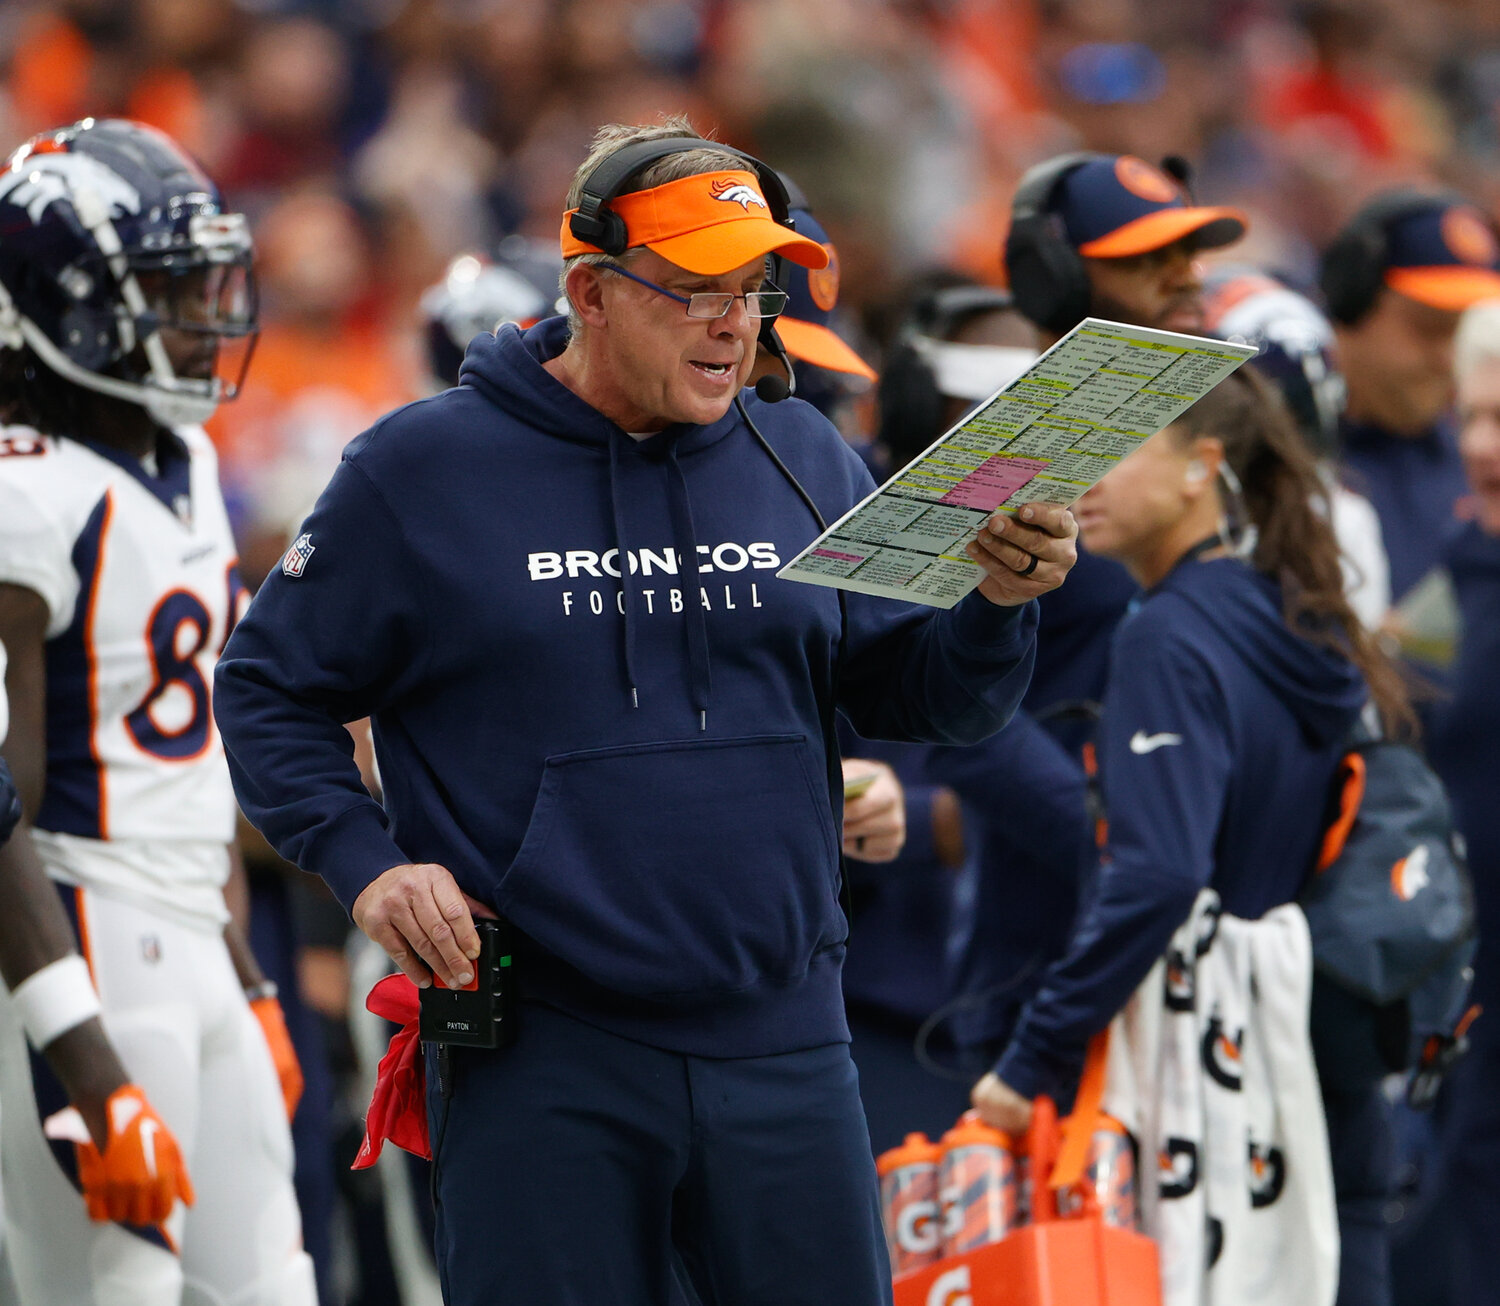 Broncos head coach Sean Payton during an NFL game between the Texans and the Broncos on December 3, 2023 in Houston. The Texans won, 22-17.